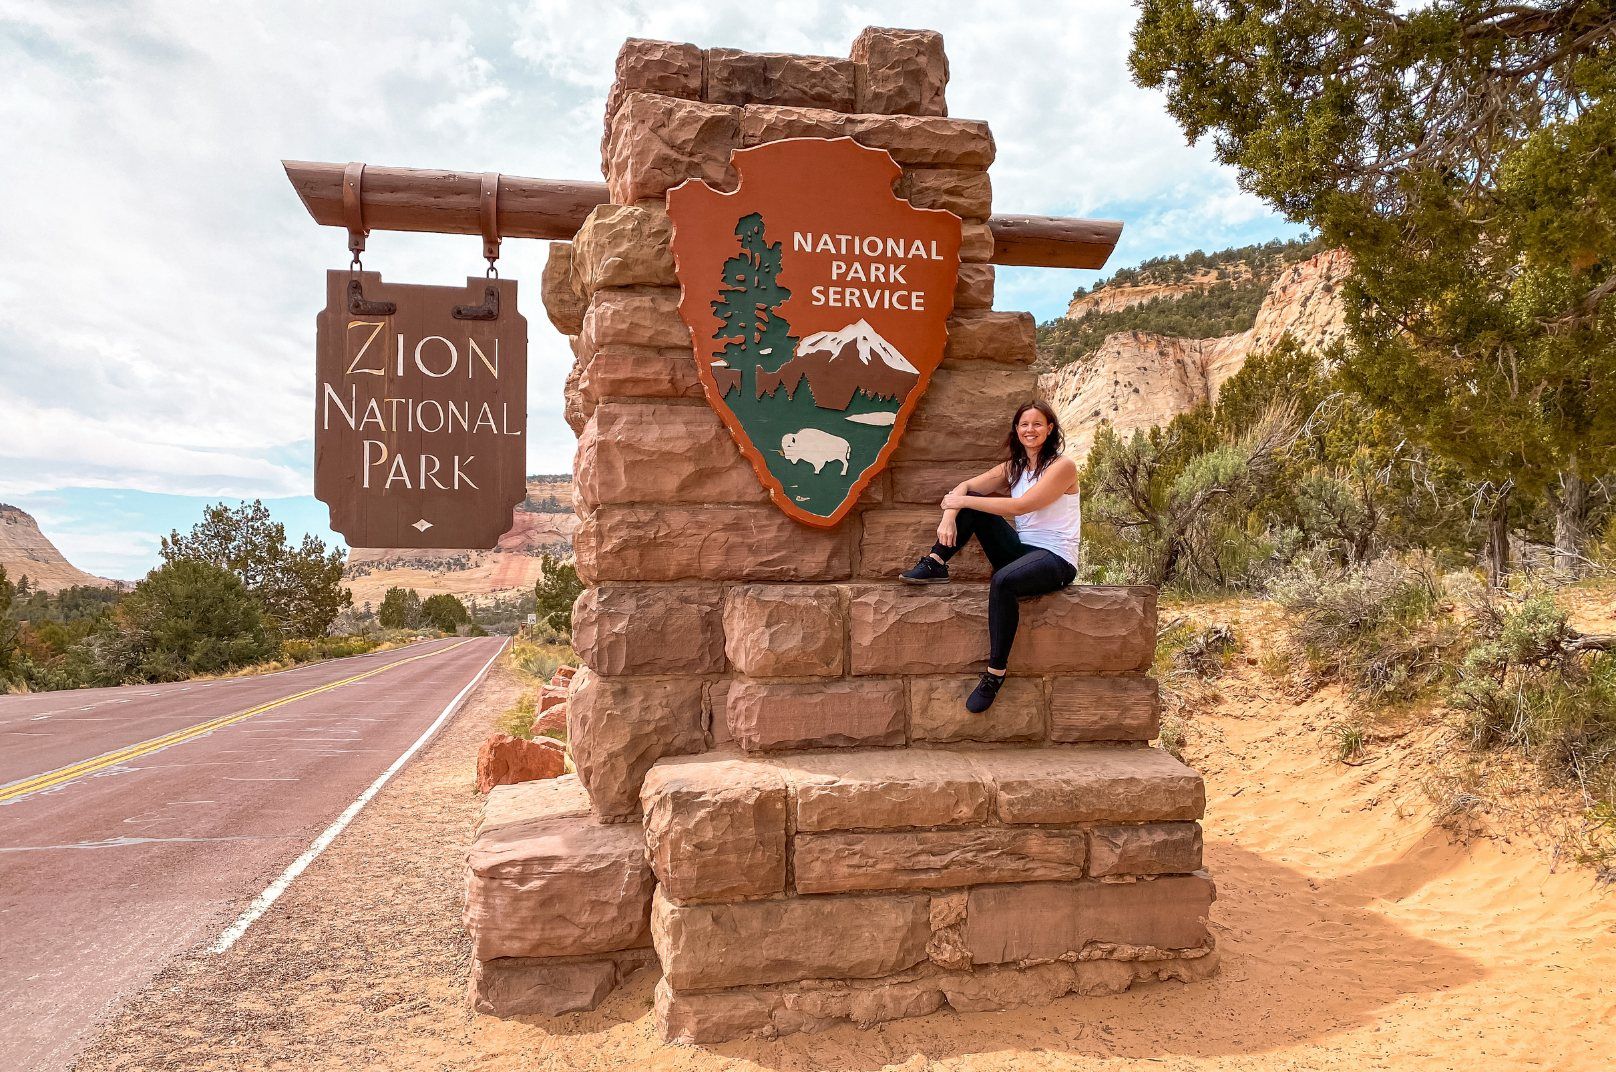 3 days in Zion National Park